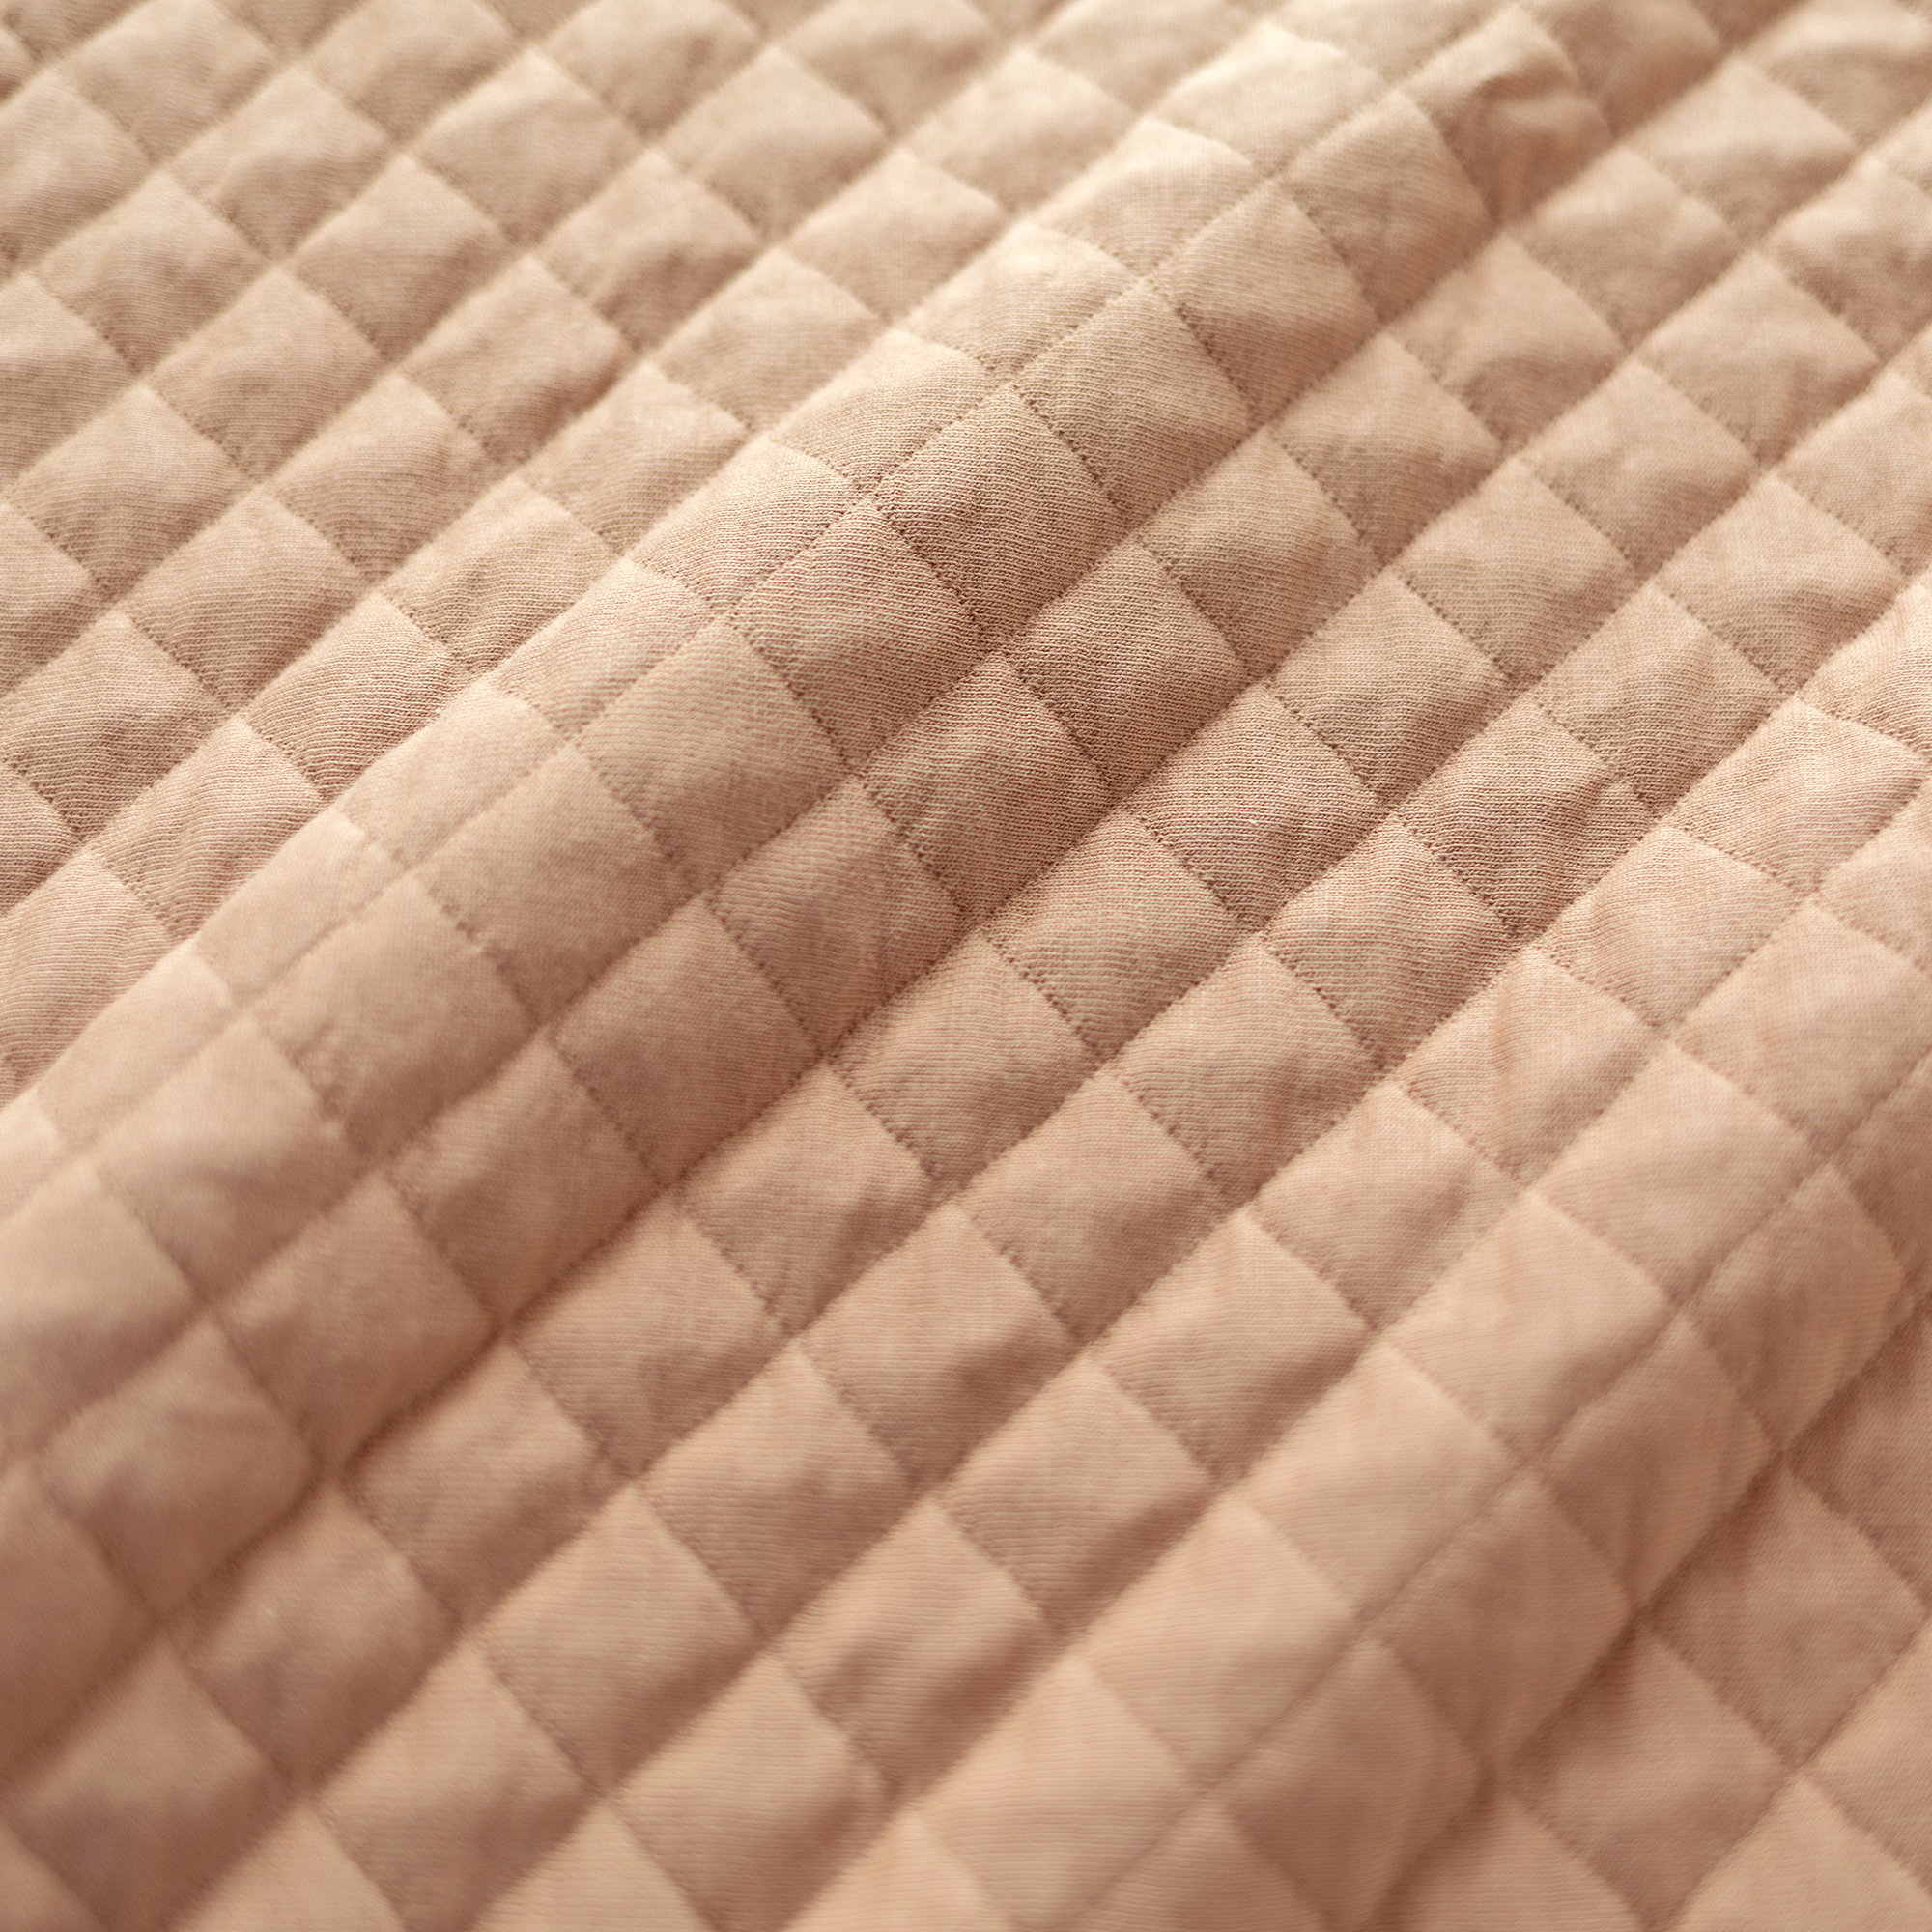 Wickelkissenbezug Pady quilted jersey 50x75cm QUILT Beige[CARE]